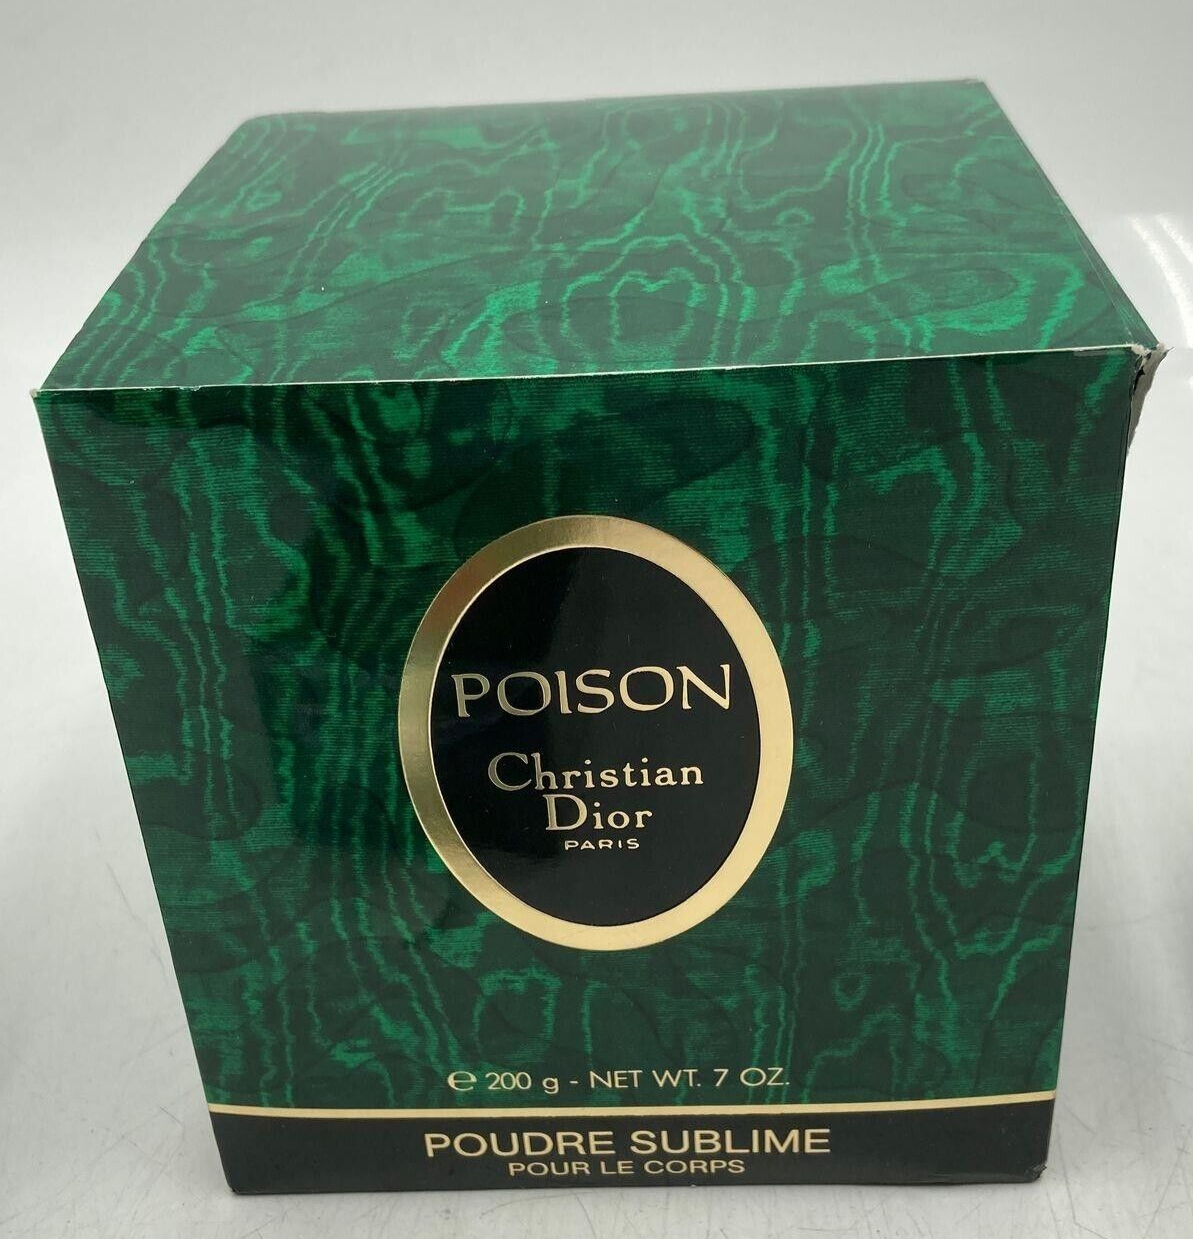 Christian Dior Poison Perfume Sublime Powder 7oz 200g Vintage Sealed and BoXed - $355.91